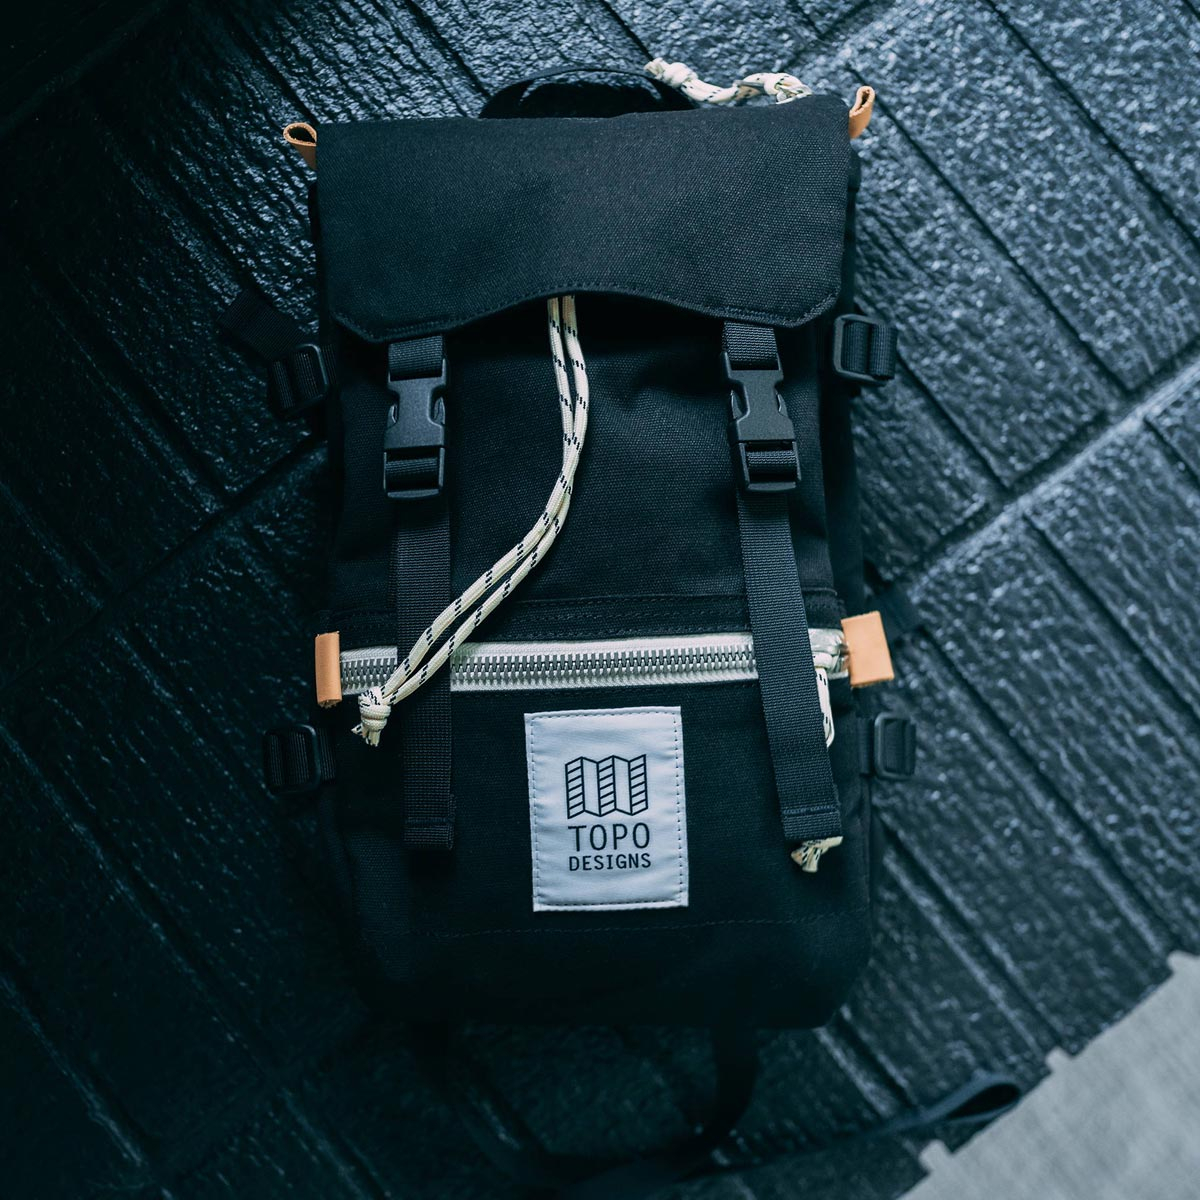 Topo Designs Rover Pack - Mini Canvas Black,, statement-making bag that’s the perfect size for errands around town or on the trail